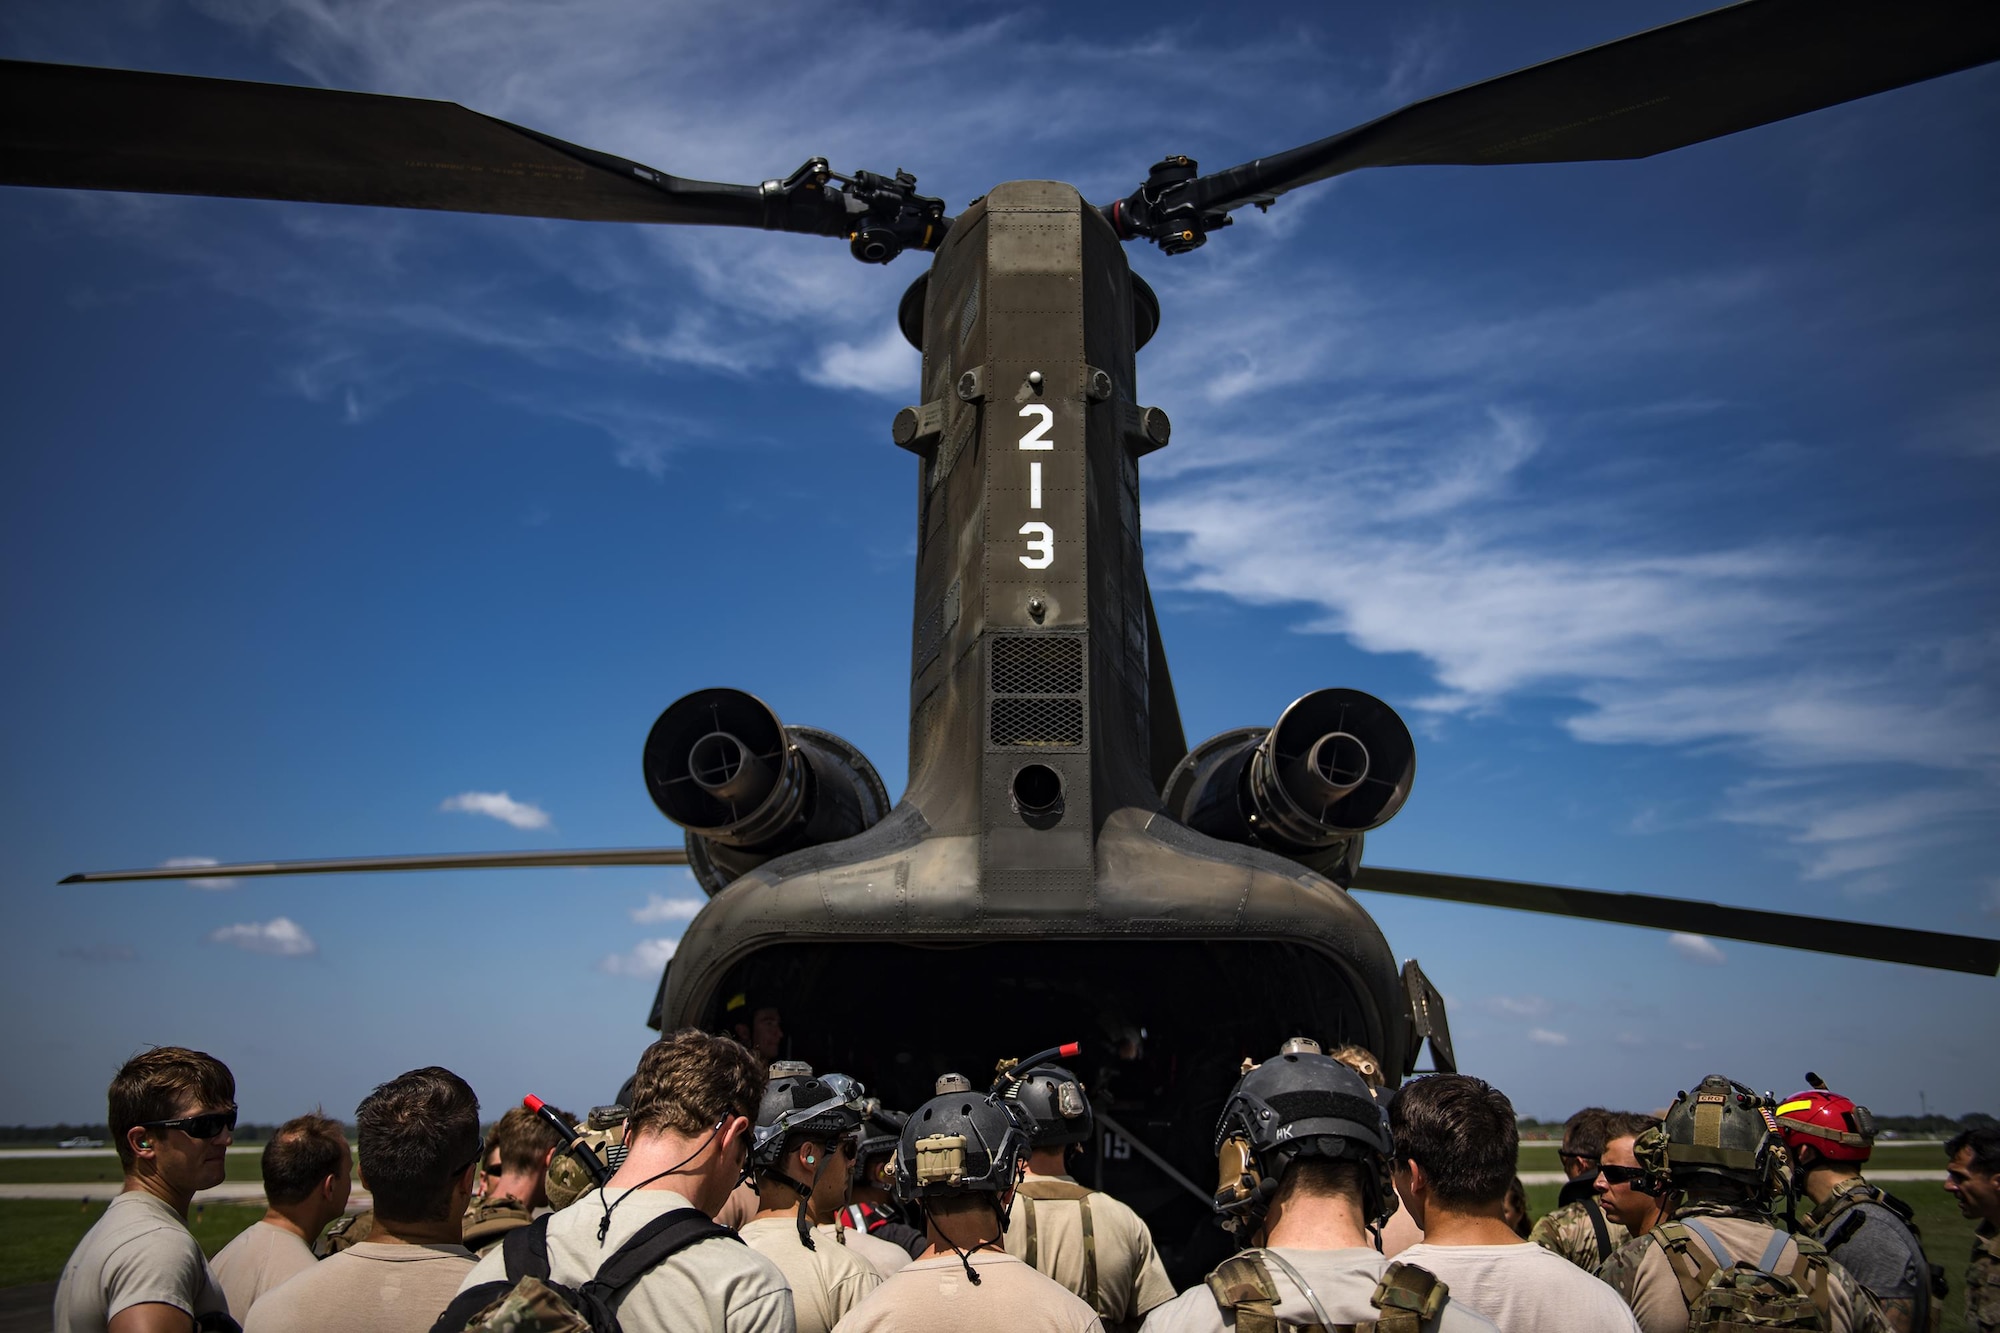 Pararescuemen from the 48th and 58th Rescue Squadrons gather around a CH-47 Chinook prior to setting up boat rescue operations, Aug. 30, 2017, at Easterwood Airport, College Park, Texas.